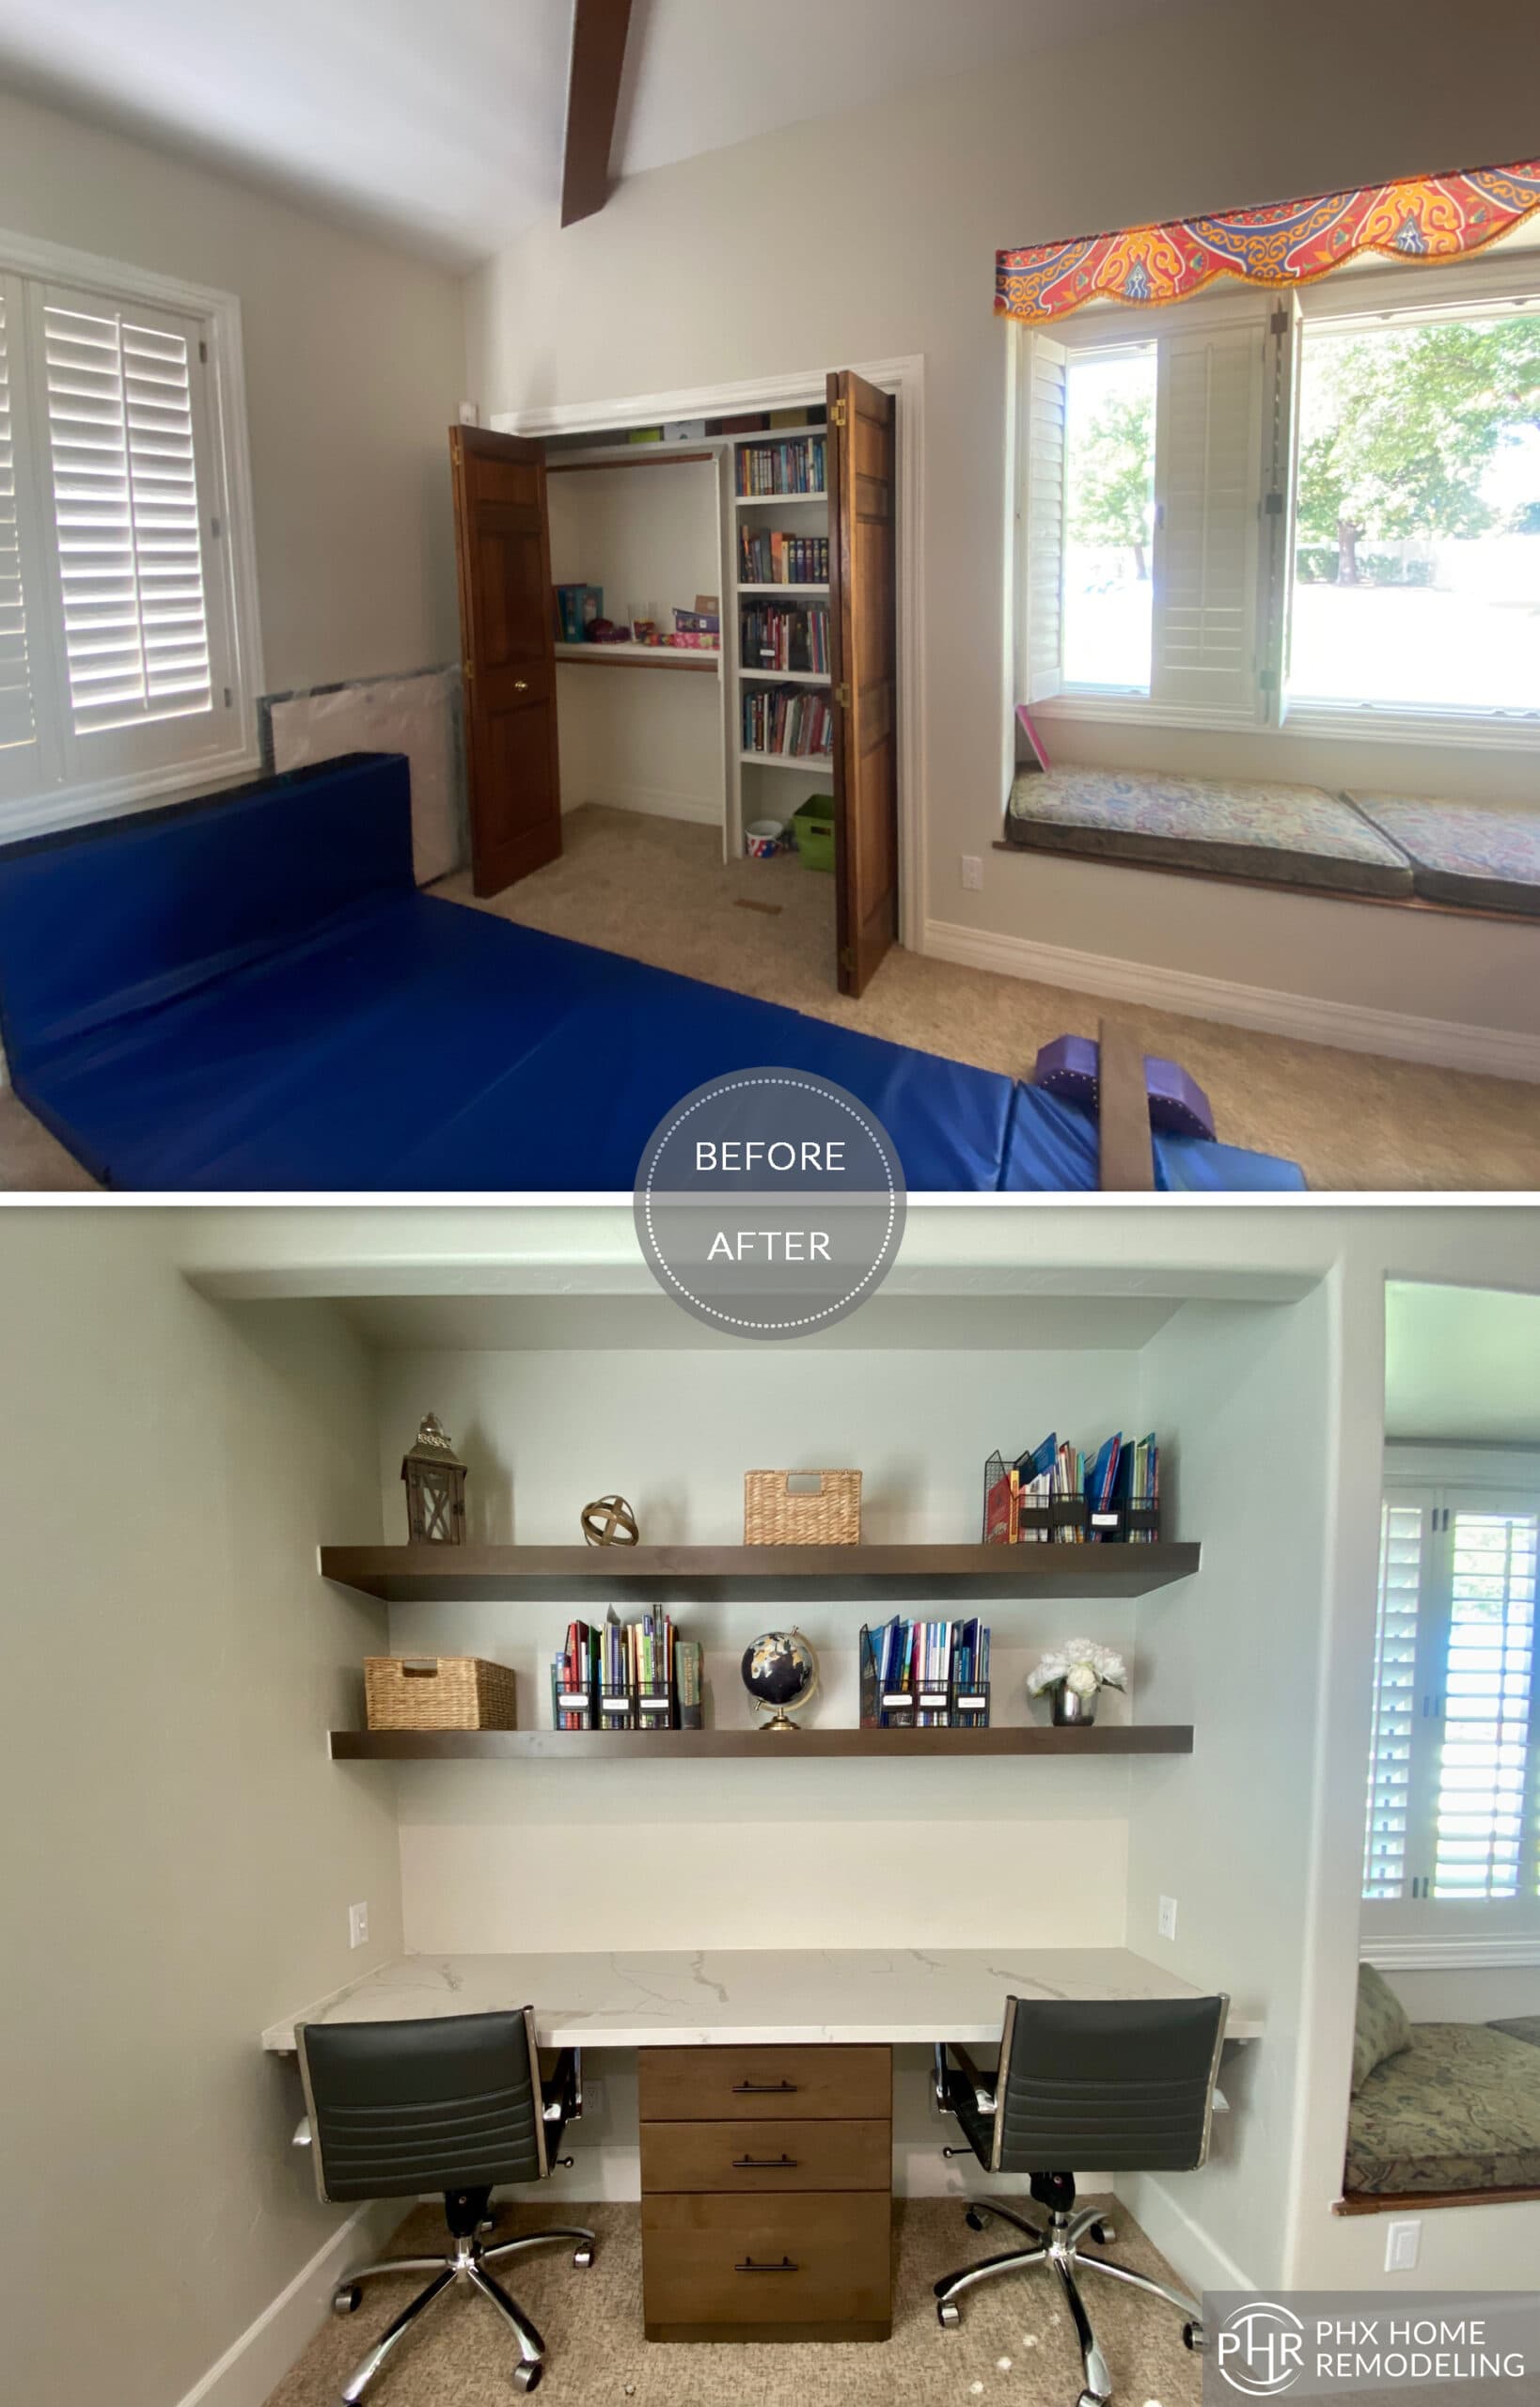 Master Bedroom Remodeling Before After - General Contractor Services